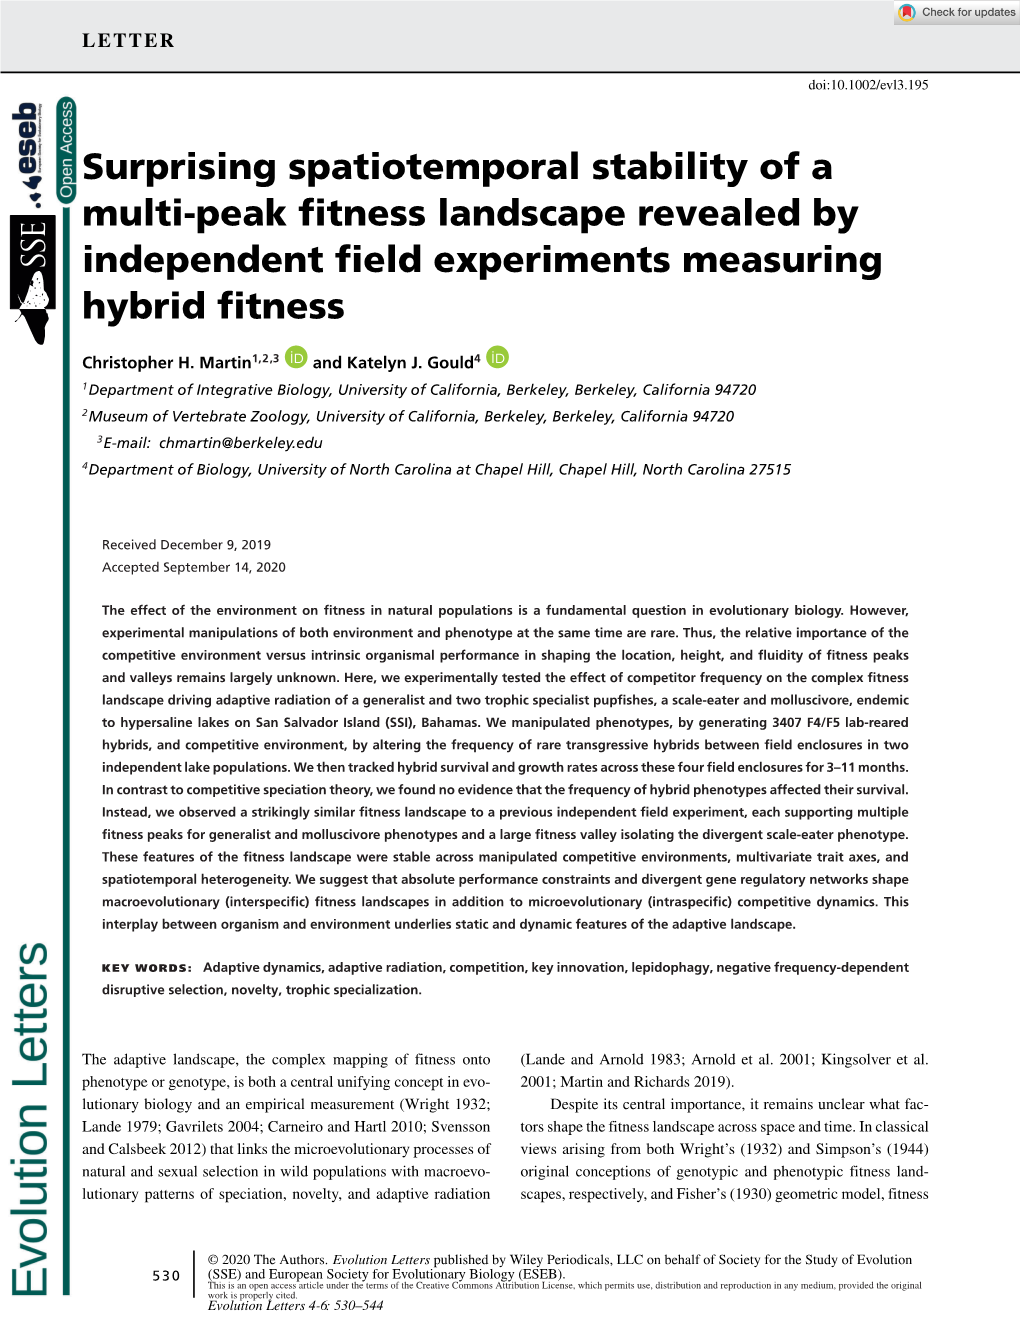 Surprising Spatiotemporal Stability of a Multi‐Peak Fitness Landscape